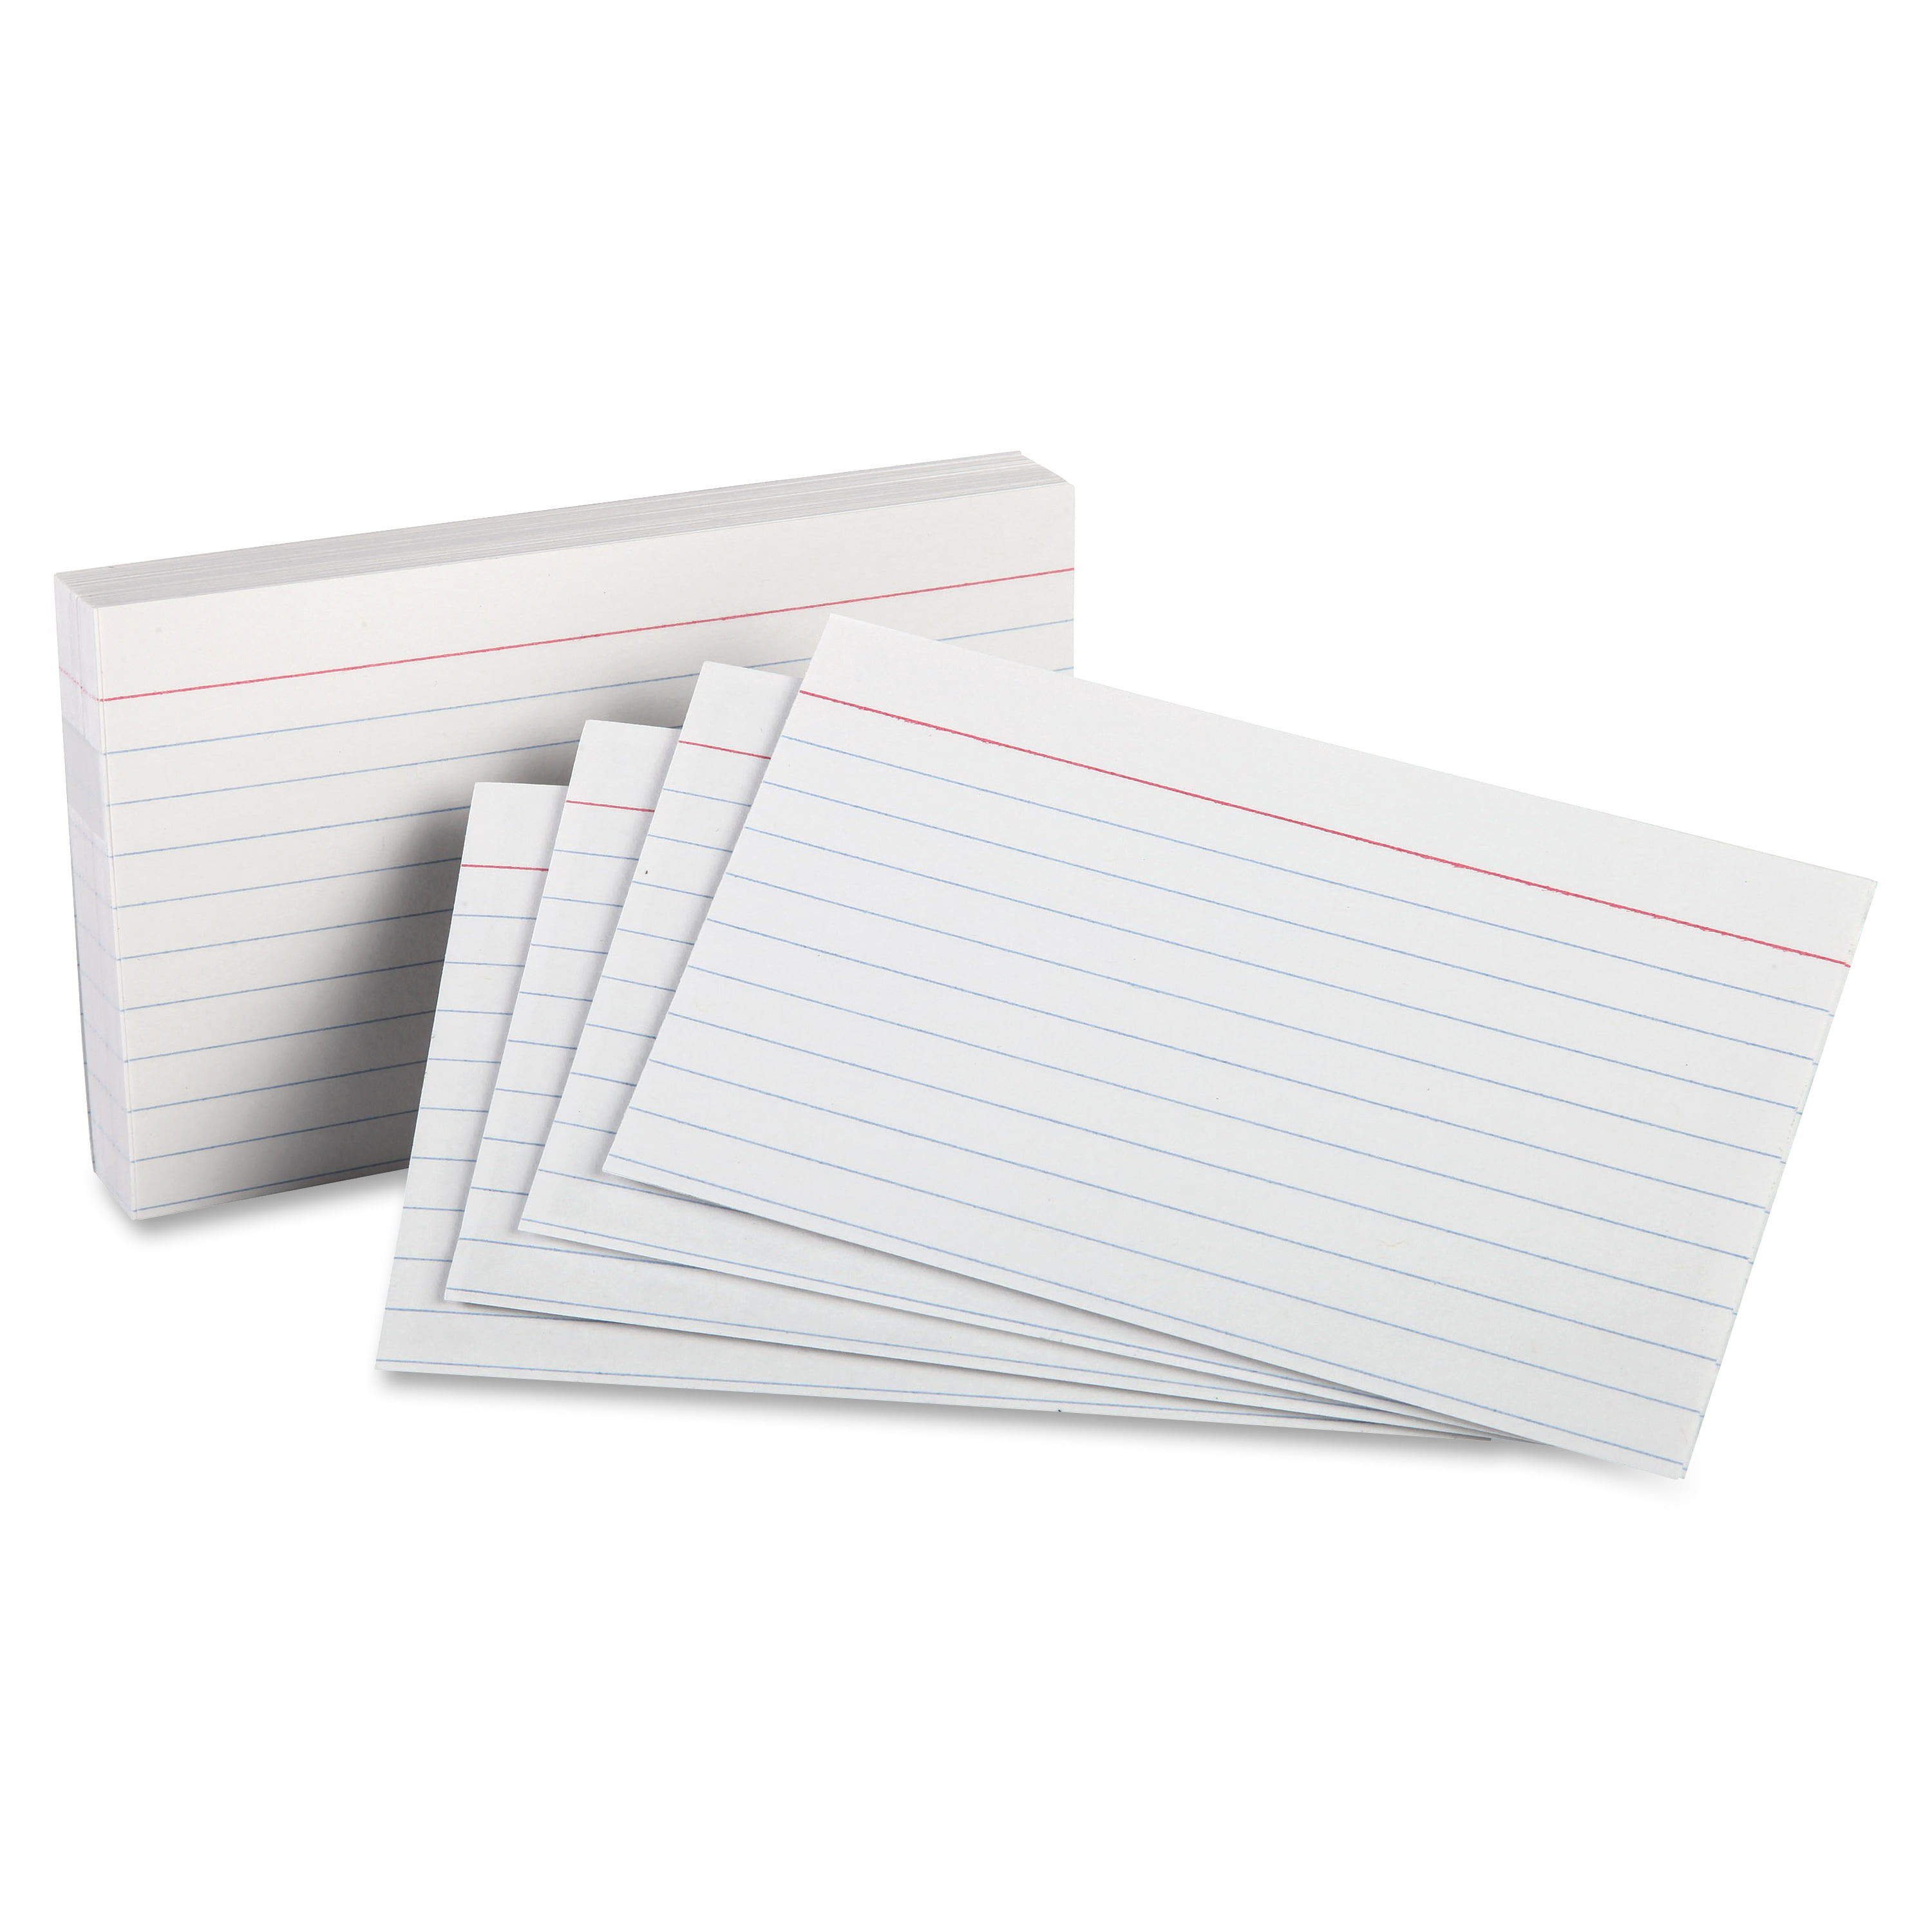 Ruled 3 x 2.5 10010 200 per Pack Oxford Half Size Index Cards Assorted Colors